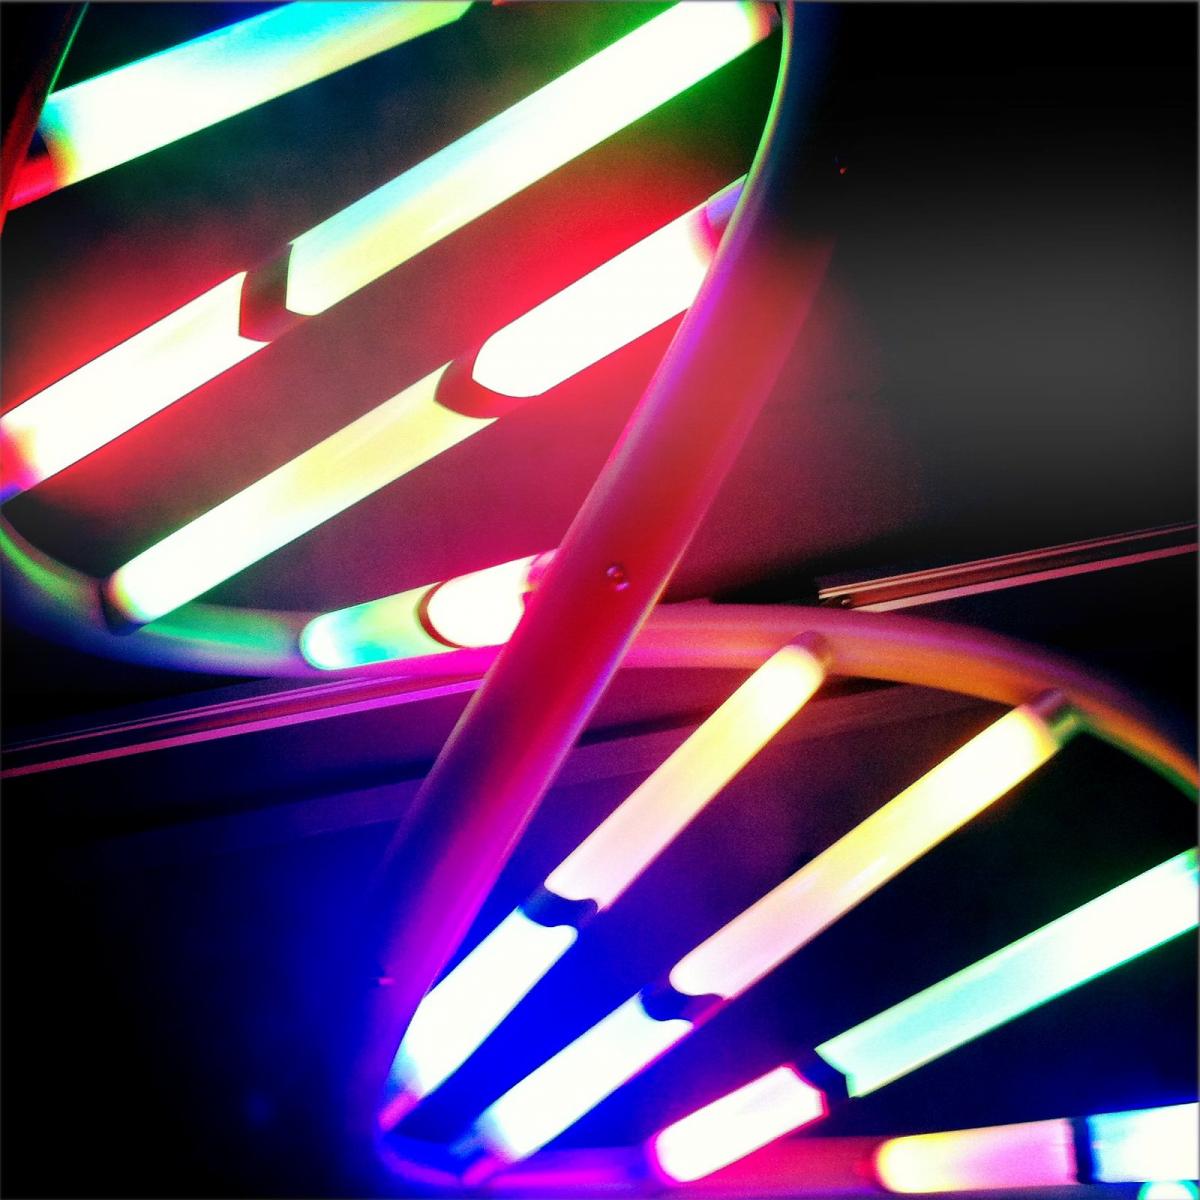 Neon lights arranged to resemble the structure of DNA